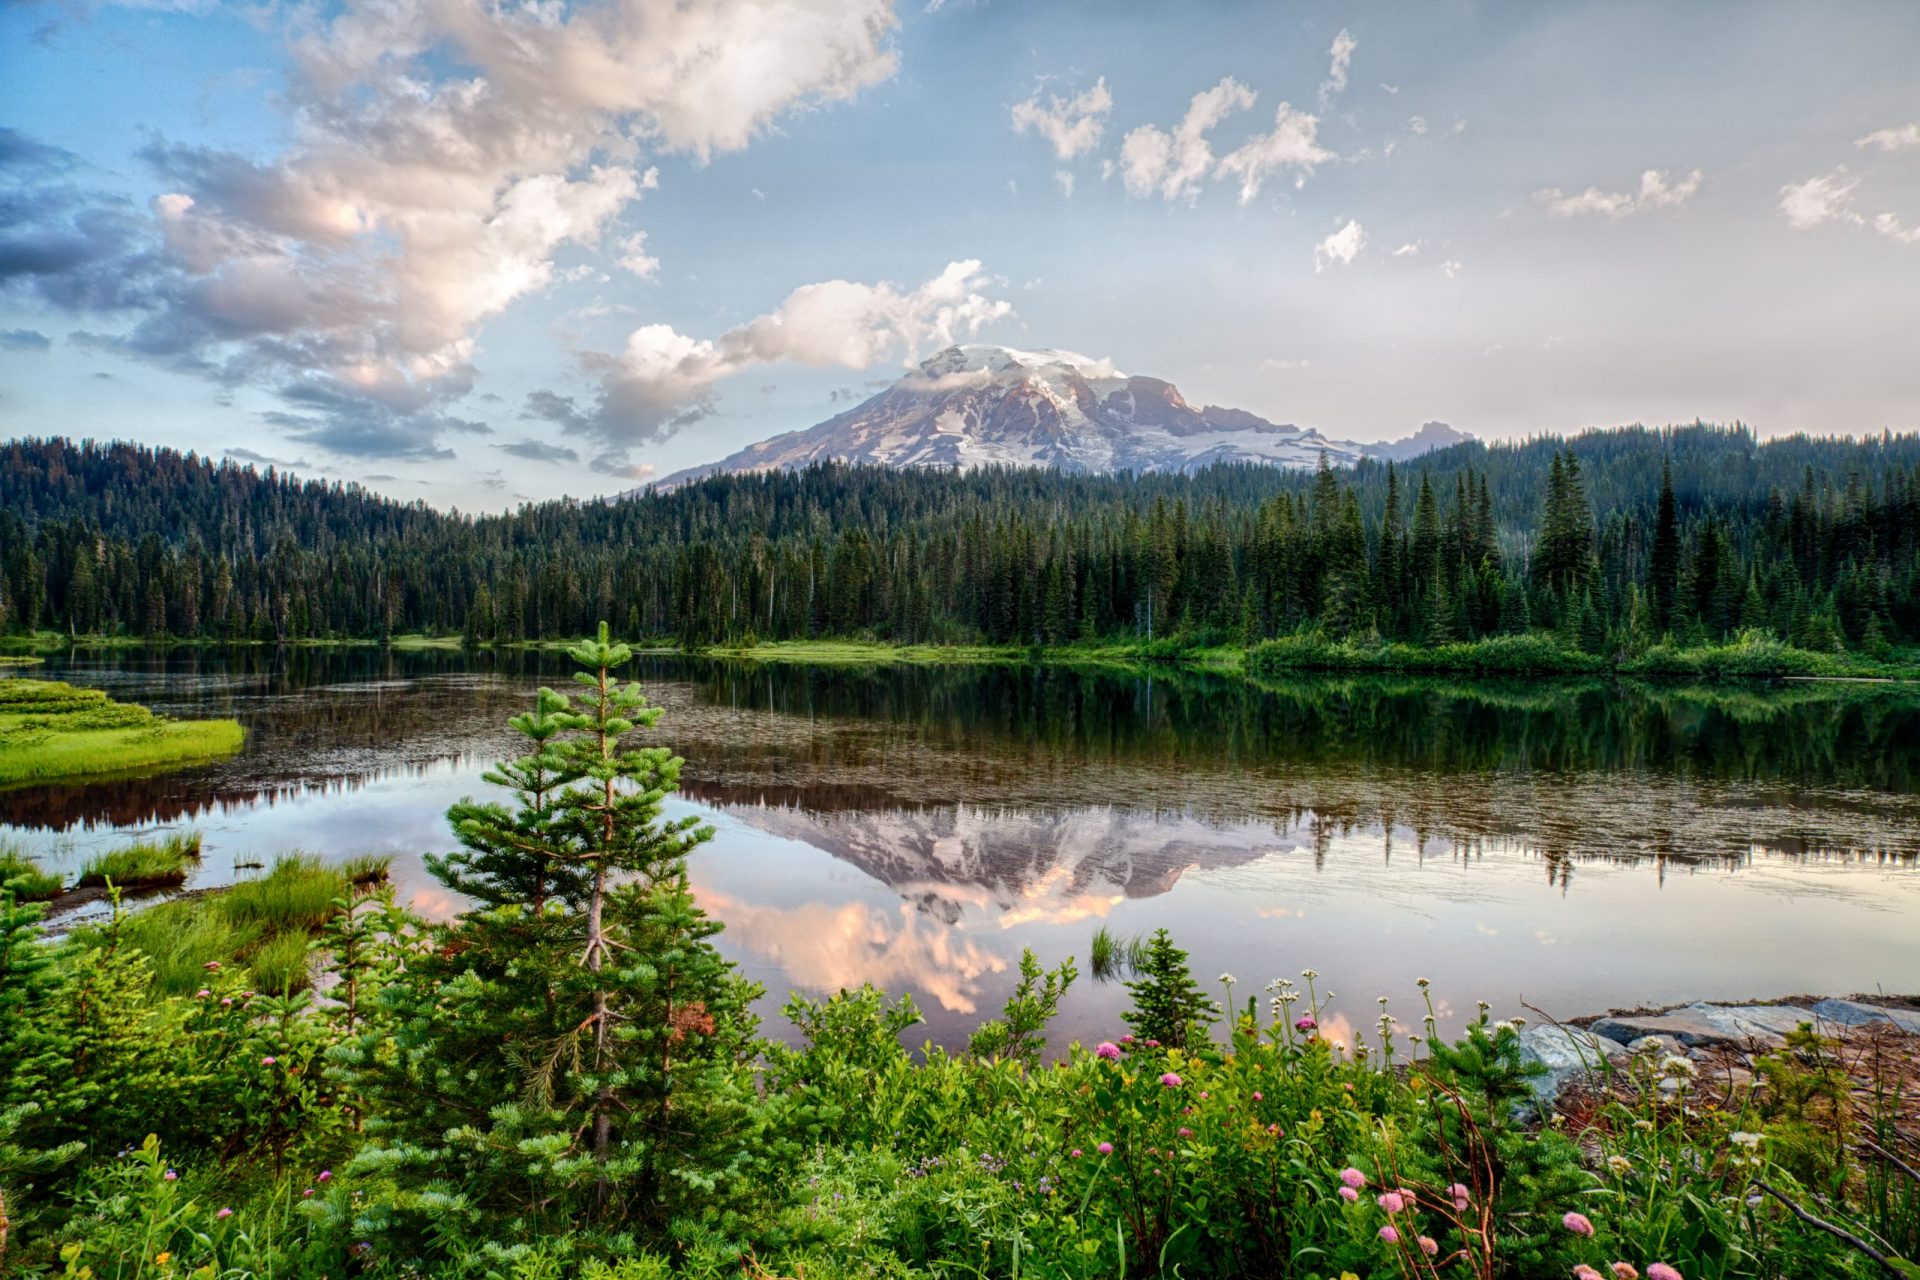 Mt Rainier and Reflection Lake at sunrise and wildflowers blooming